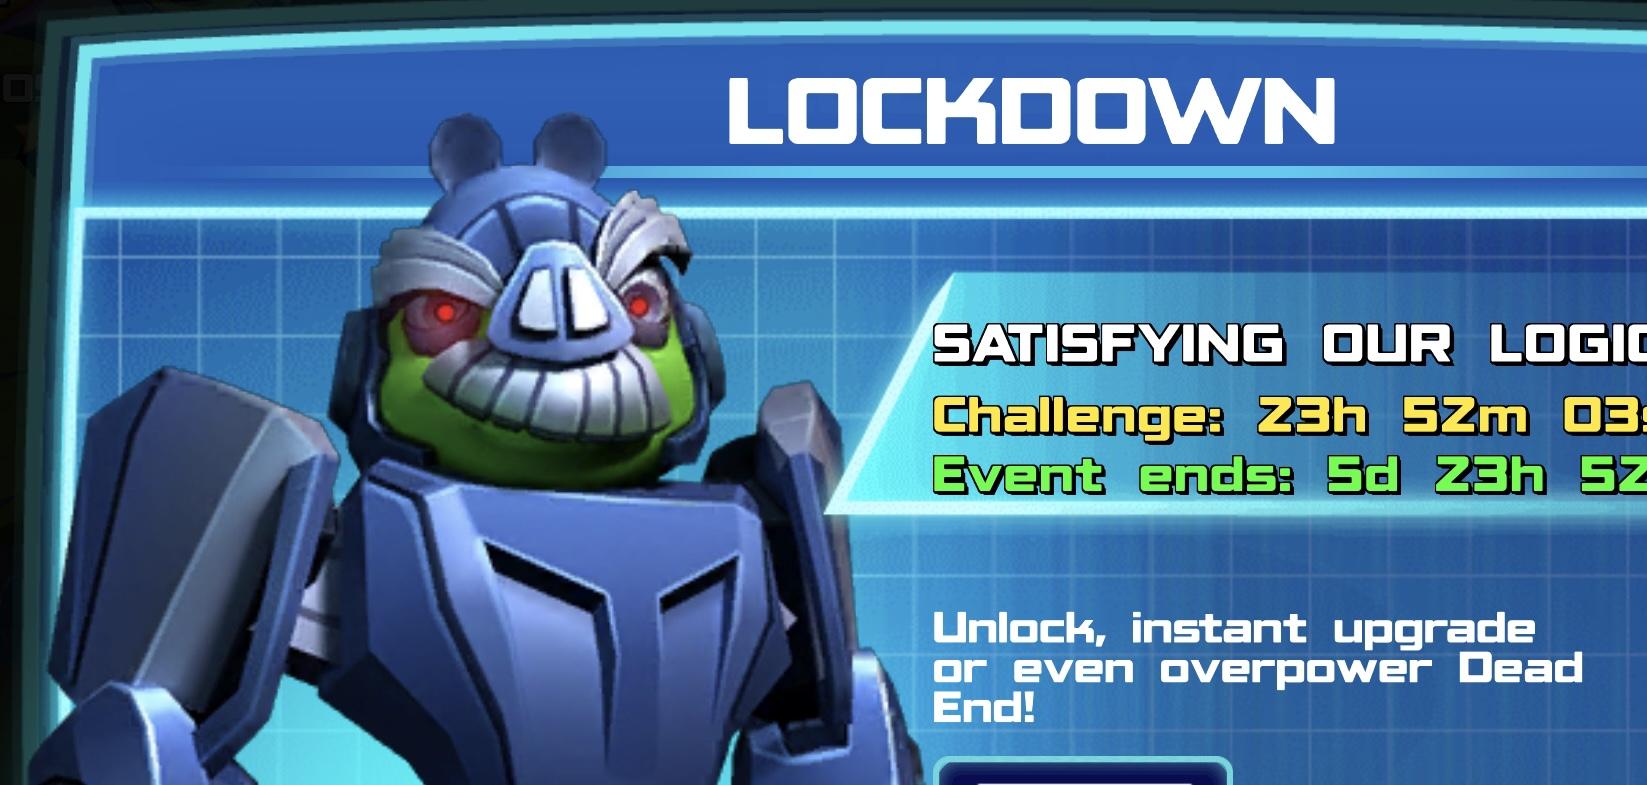 The event banner for Lockdown